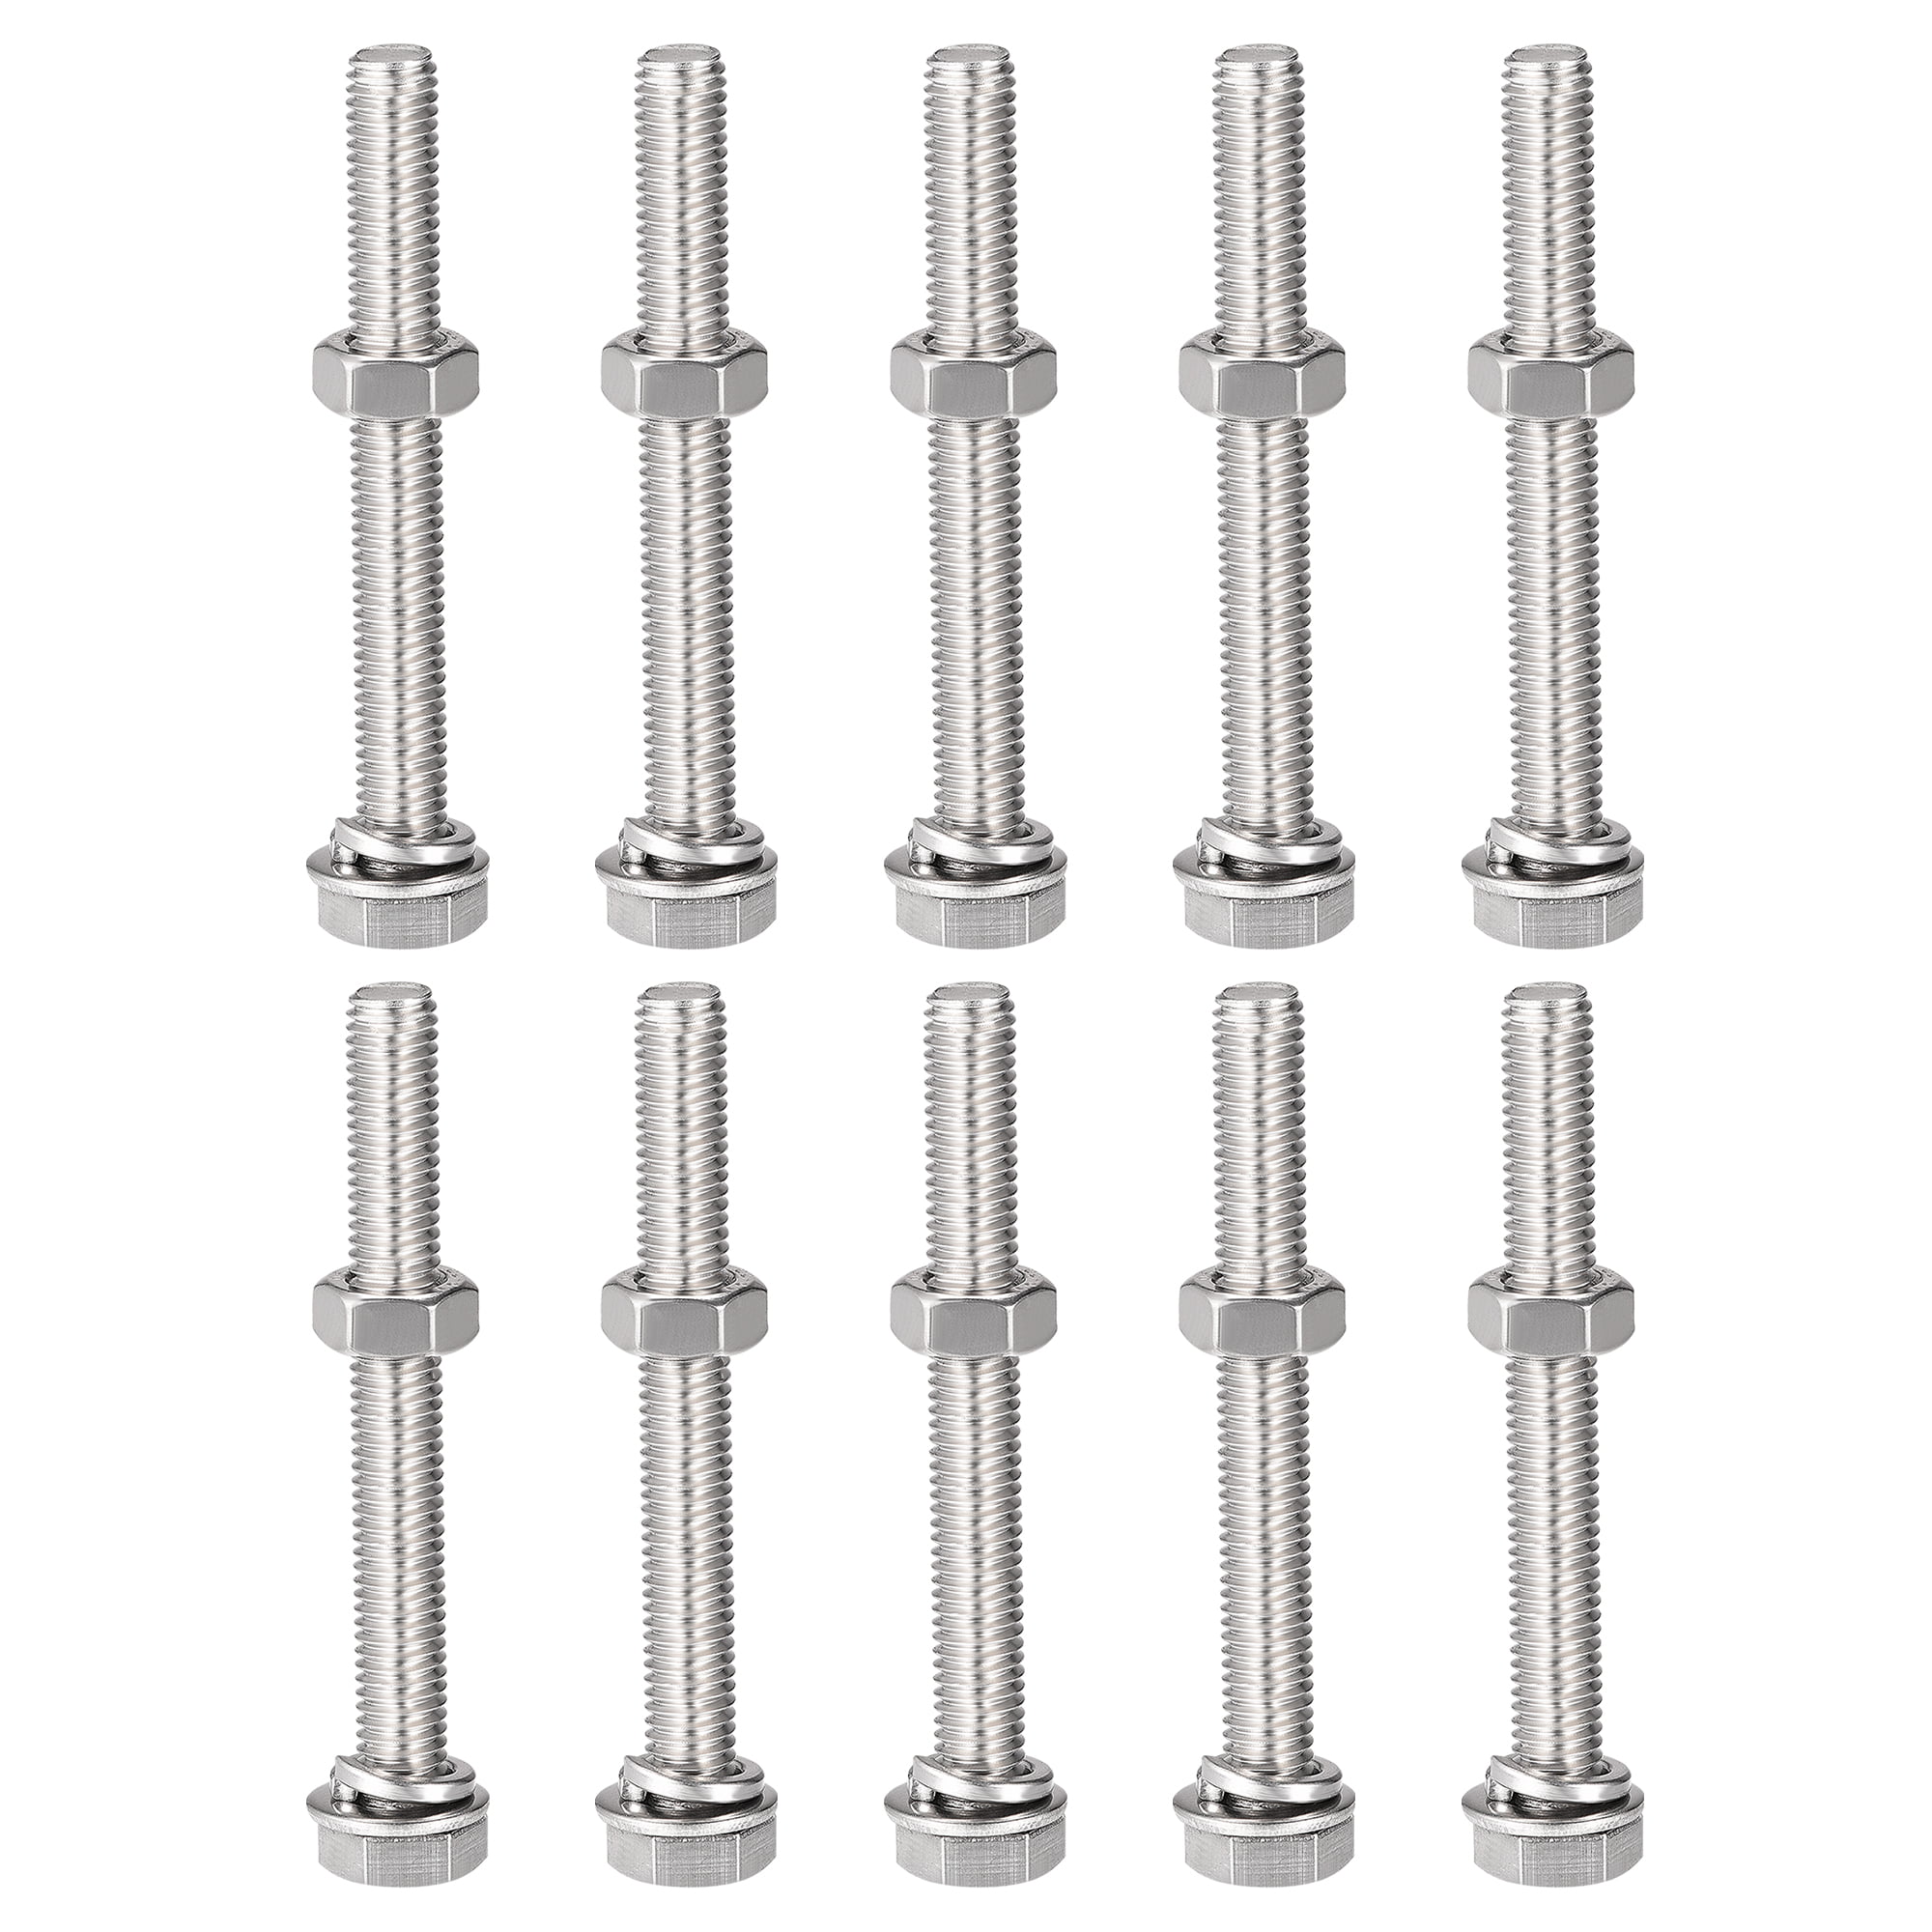 Bolt M8 x 30mm - Other products - Tools - Fasteners - Bolts and nuts -  Wandamotor